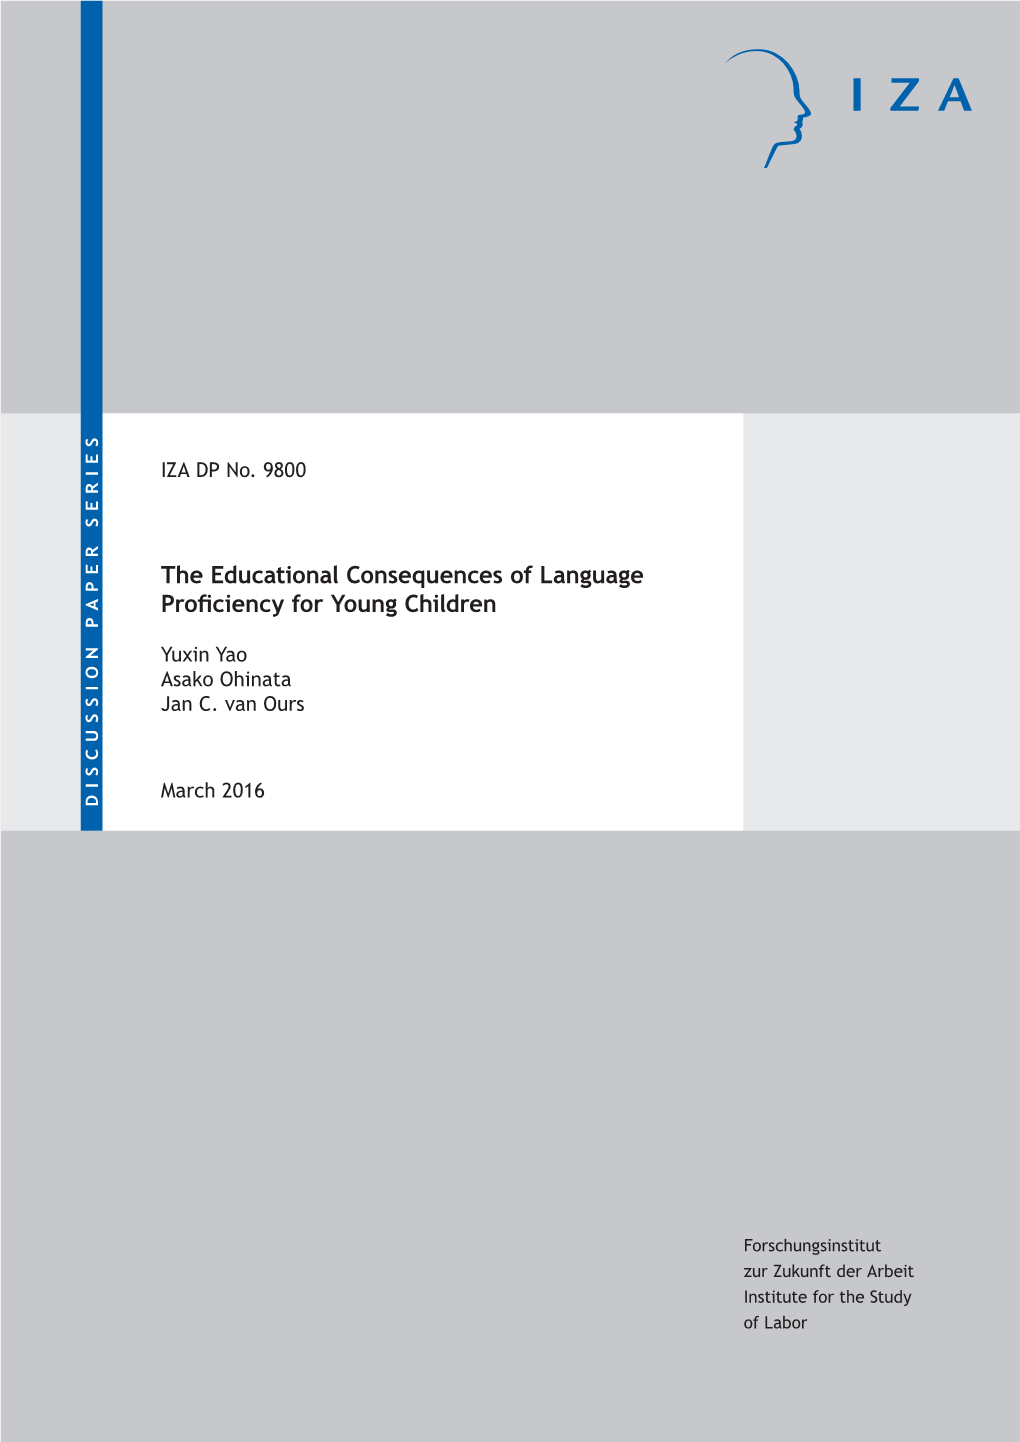 The Educational Consequences of Language Proficiency for Young Children